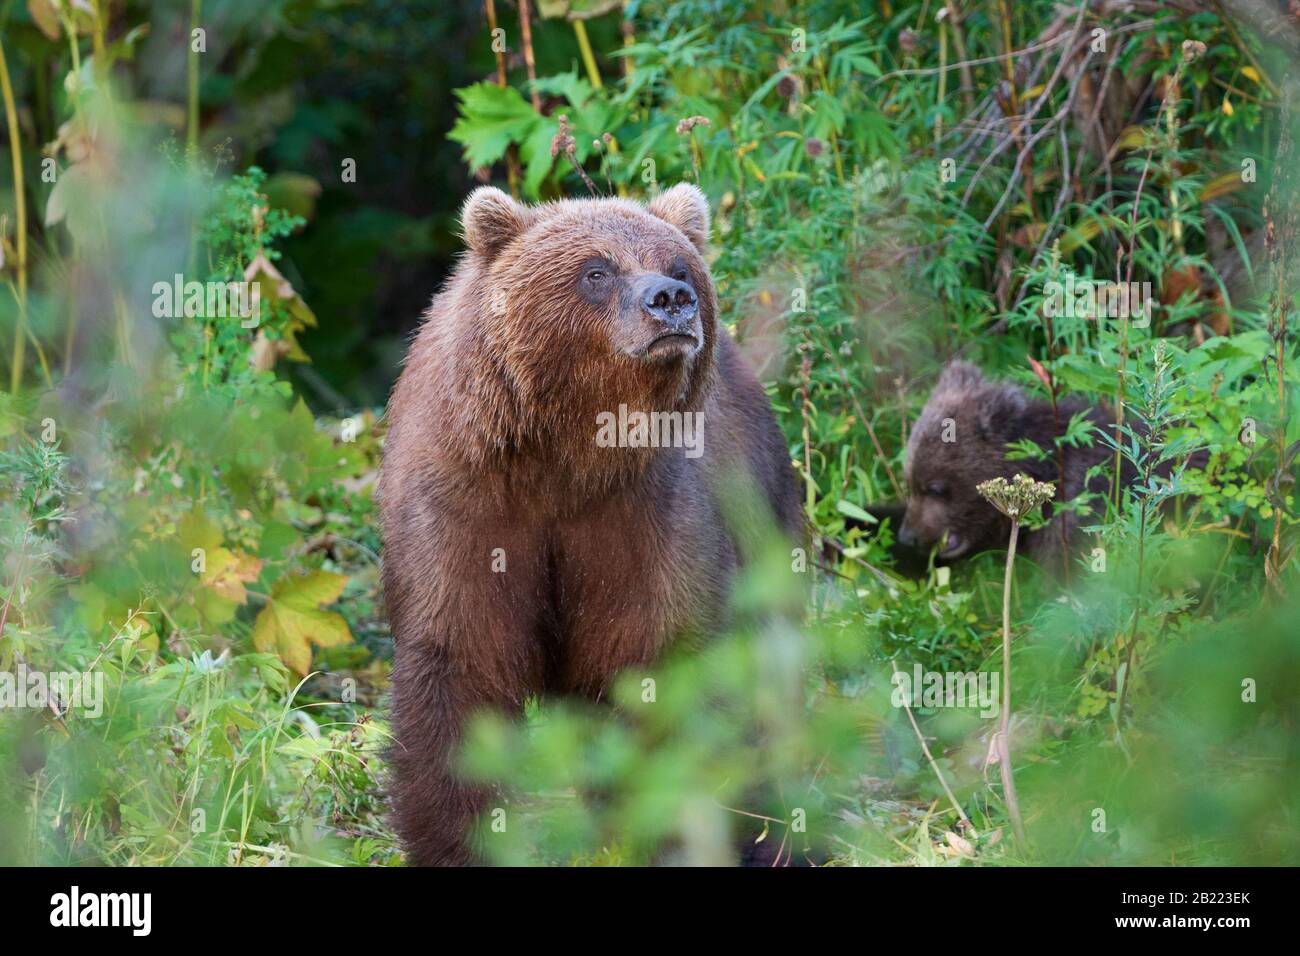 Wild Kamchatka brown bear Ursus arctos piscator in natural habitat, looking out of summer forest. Kamchatka Peninsula - travel destinations wild life Stock Photo